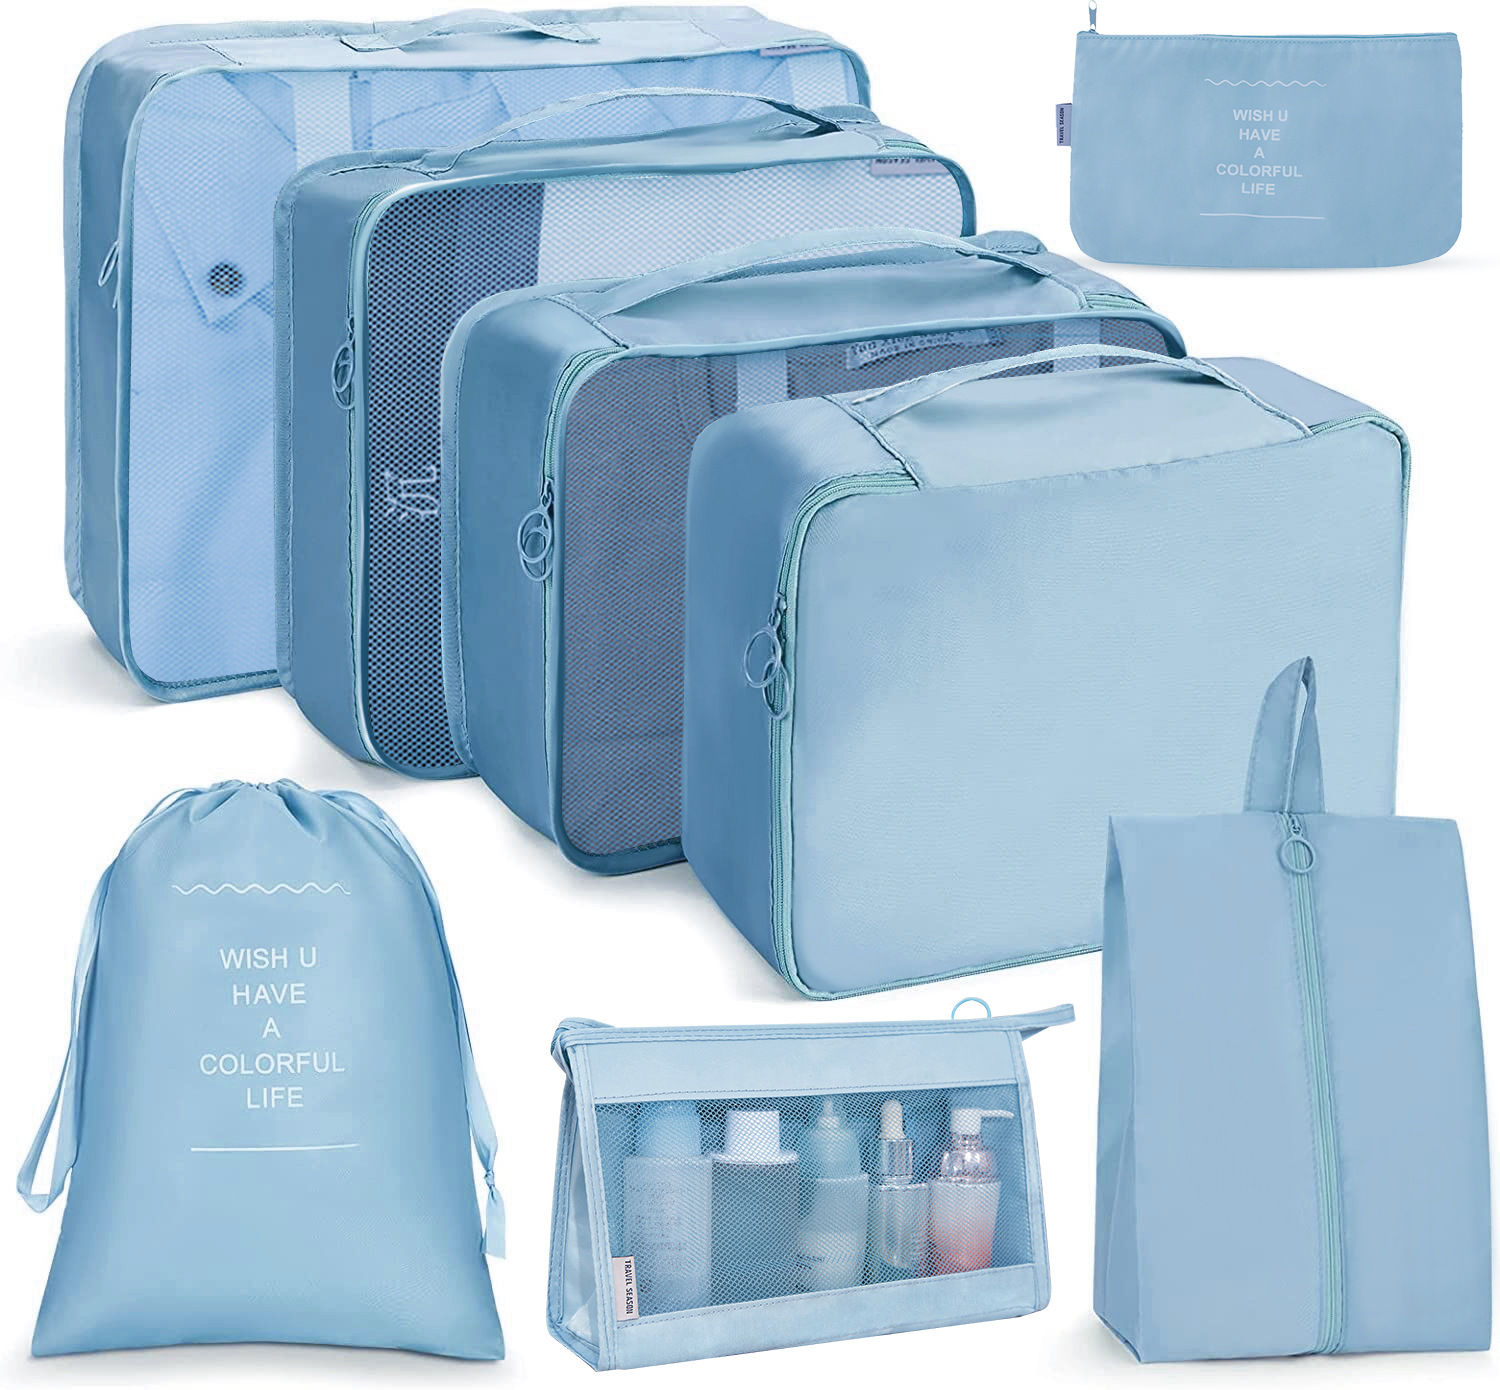 Amazon.com: Clear Vinyl Zippered Storage Bags 12 x 15 x 4 Inch 5-Pack :  Home & Kitchen